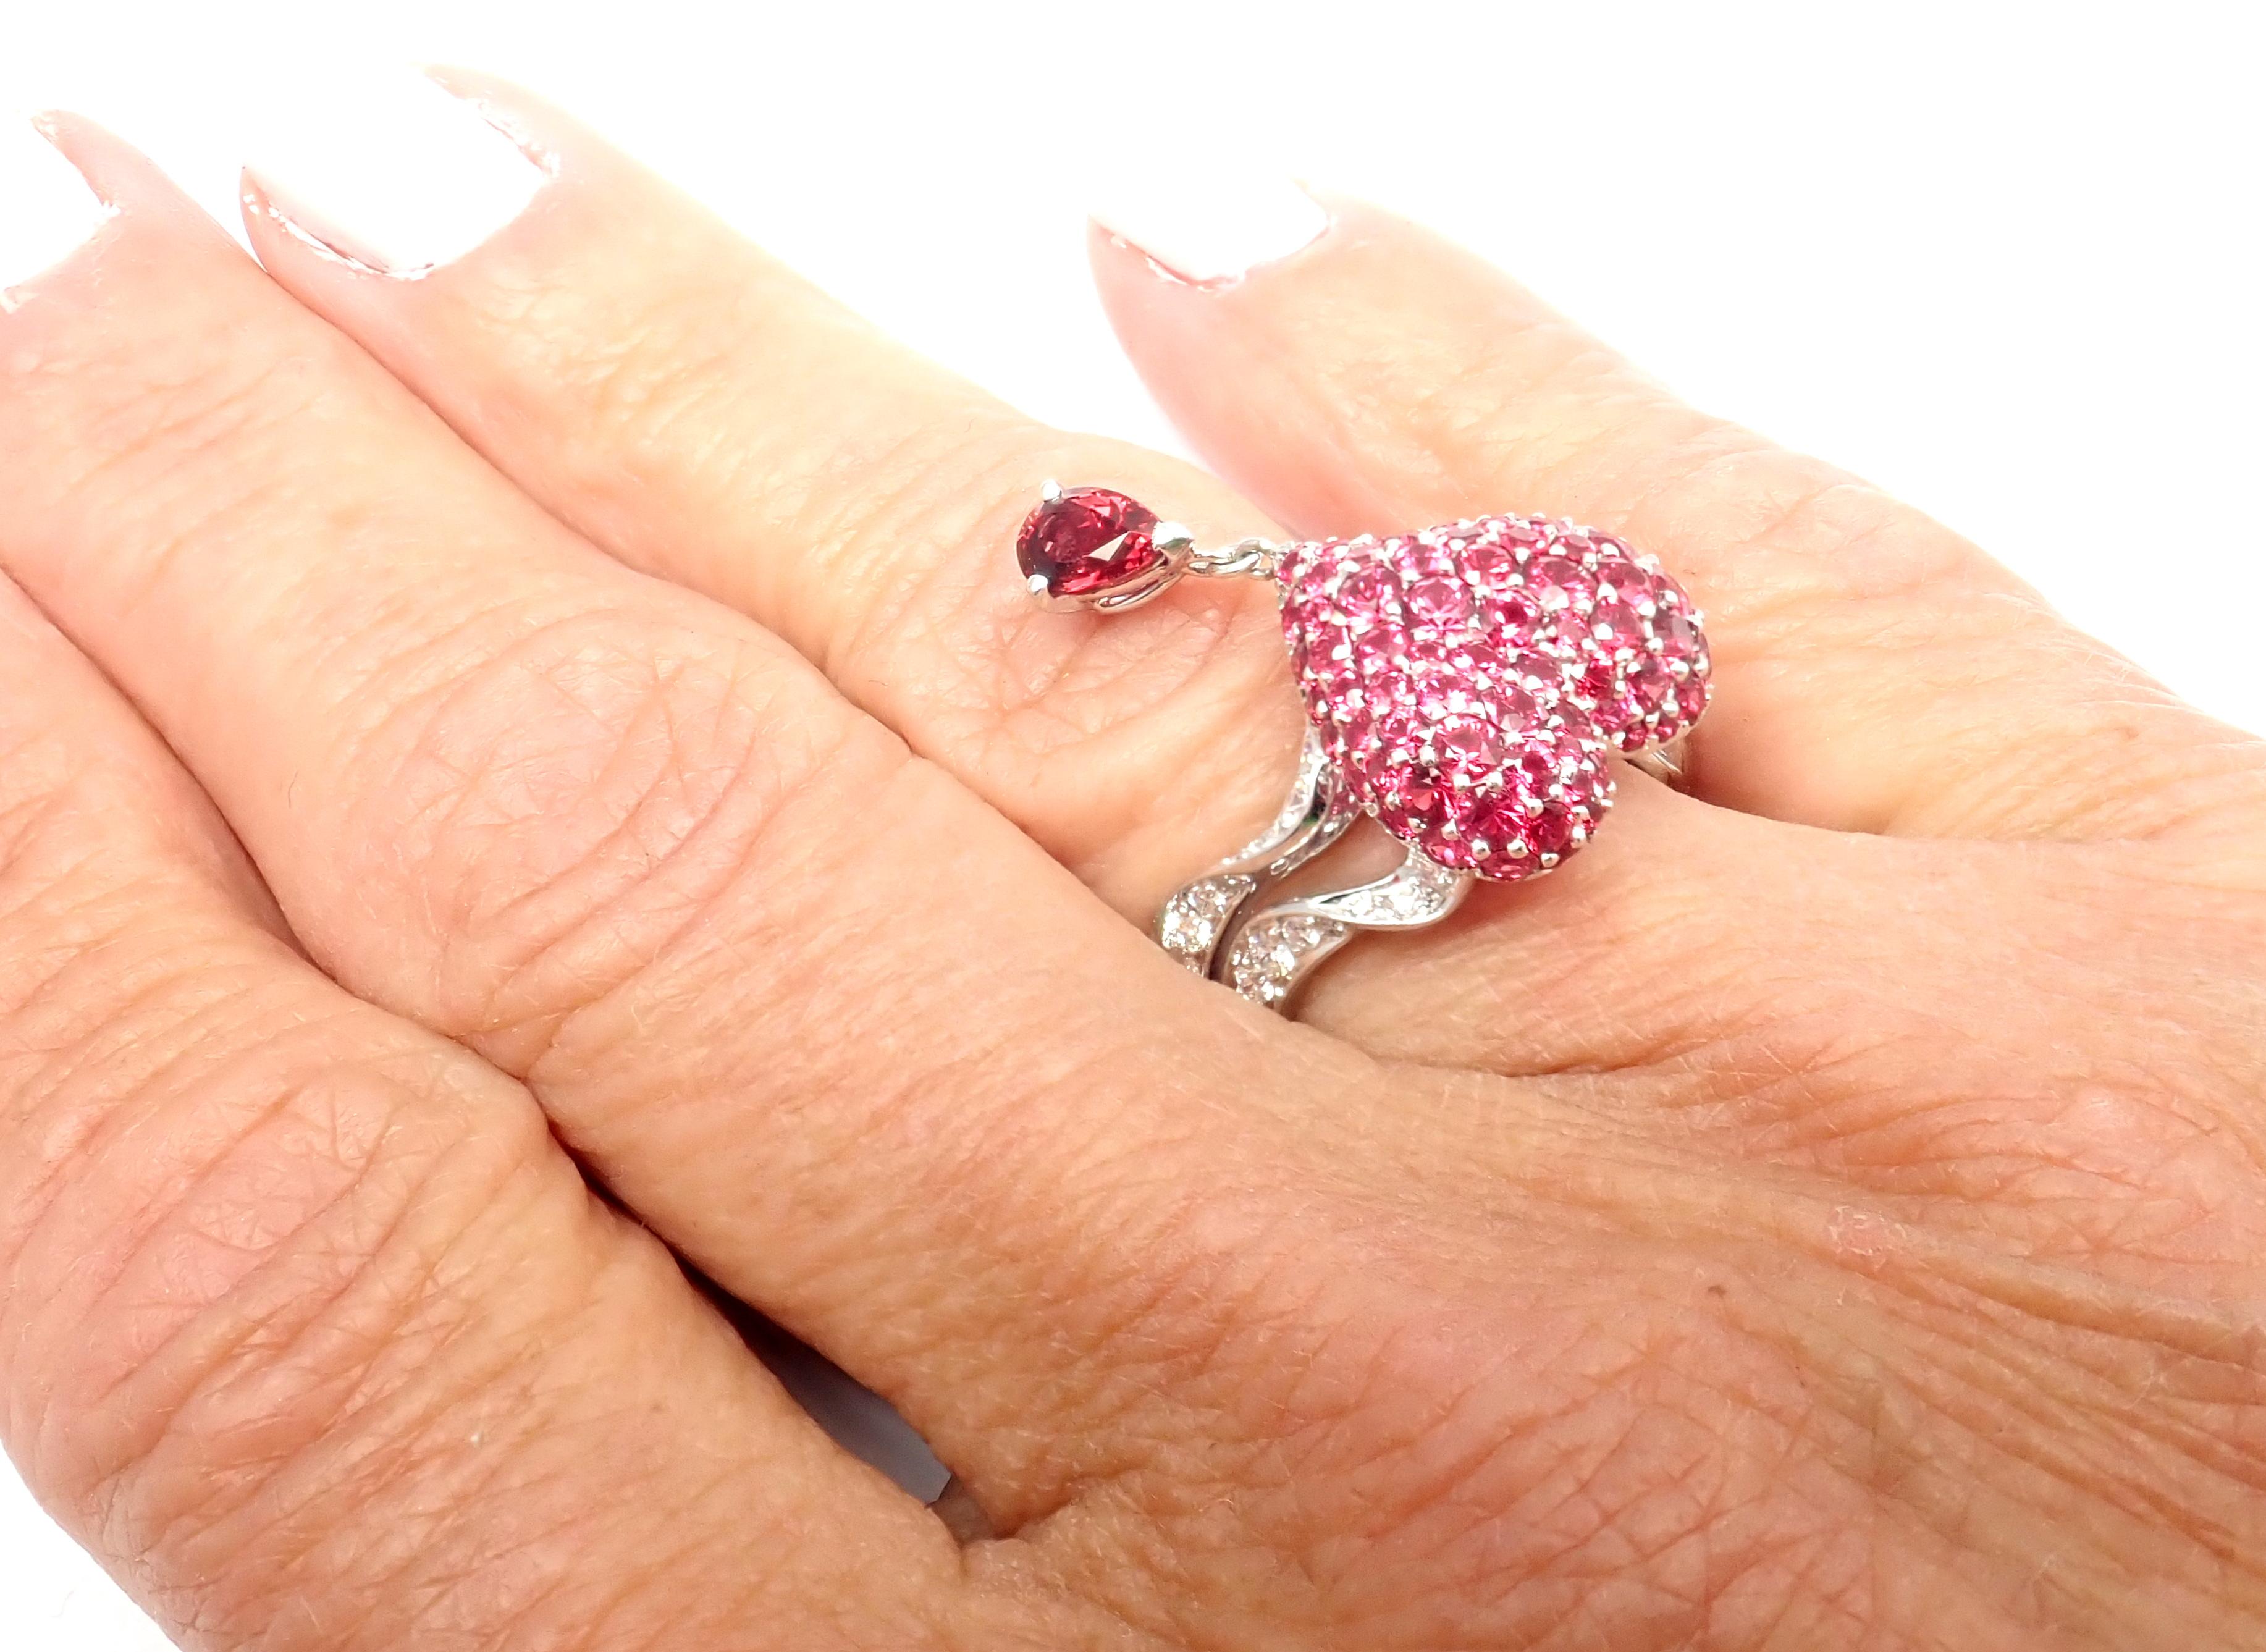 Christian Dior Cupidon Diamond Ruby Red Spinel Heart Ring 2